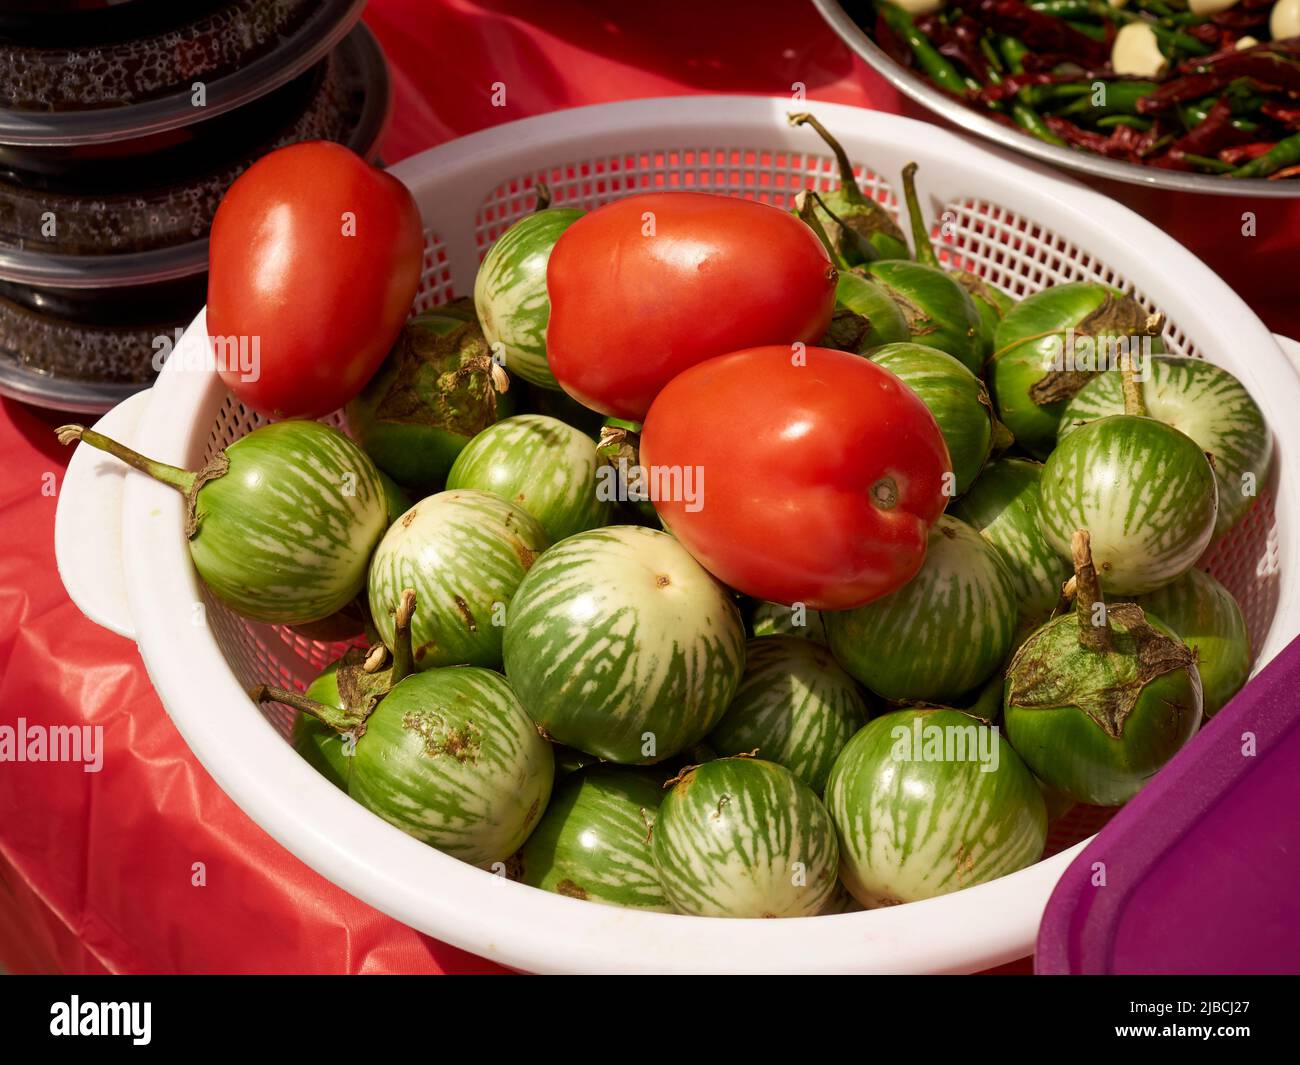 A bowl of tomatoes and eggplants for a som tum salad on a street vendor cart, Little Thailand, Queens, New York City, USA Stock Photo